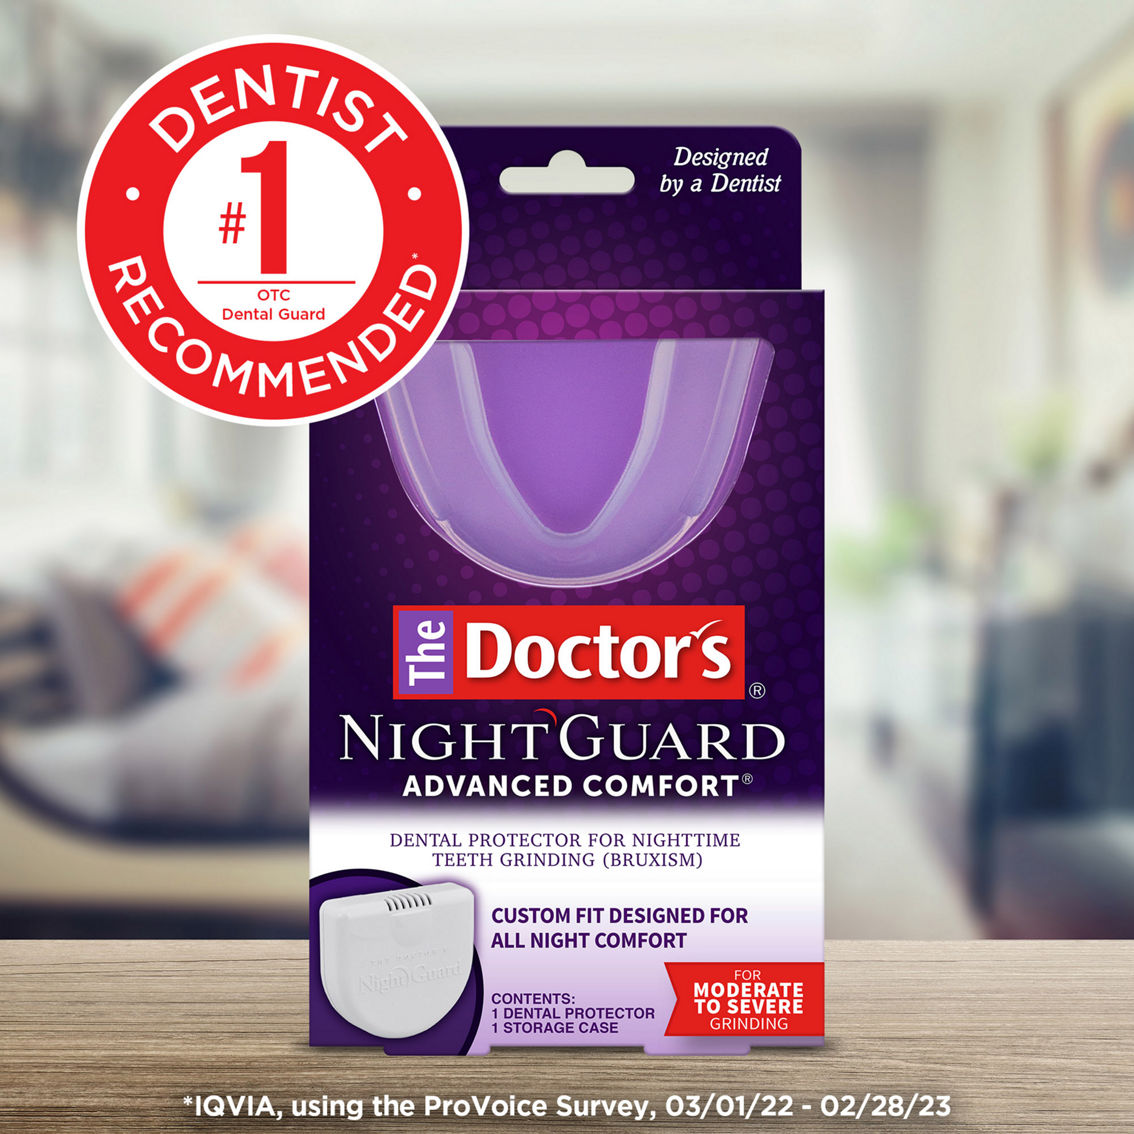 The Doctor's Advanced Comfort Night Guard for Teeth Grinding - Image 3 of 4